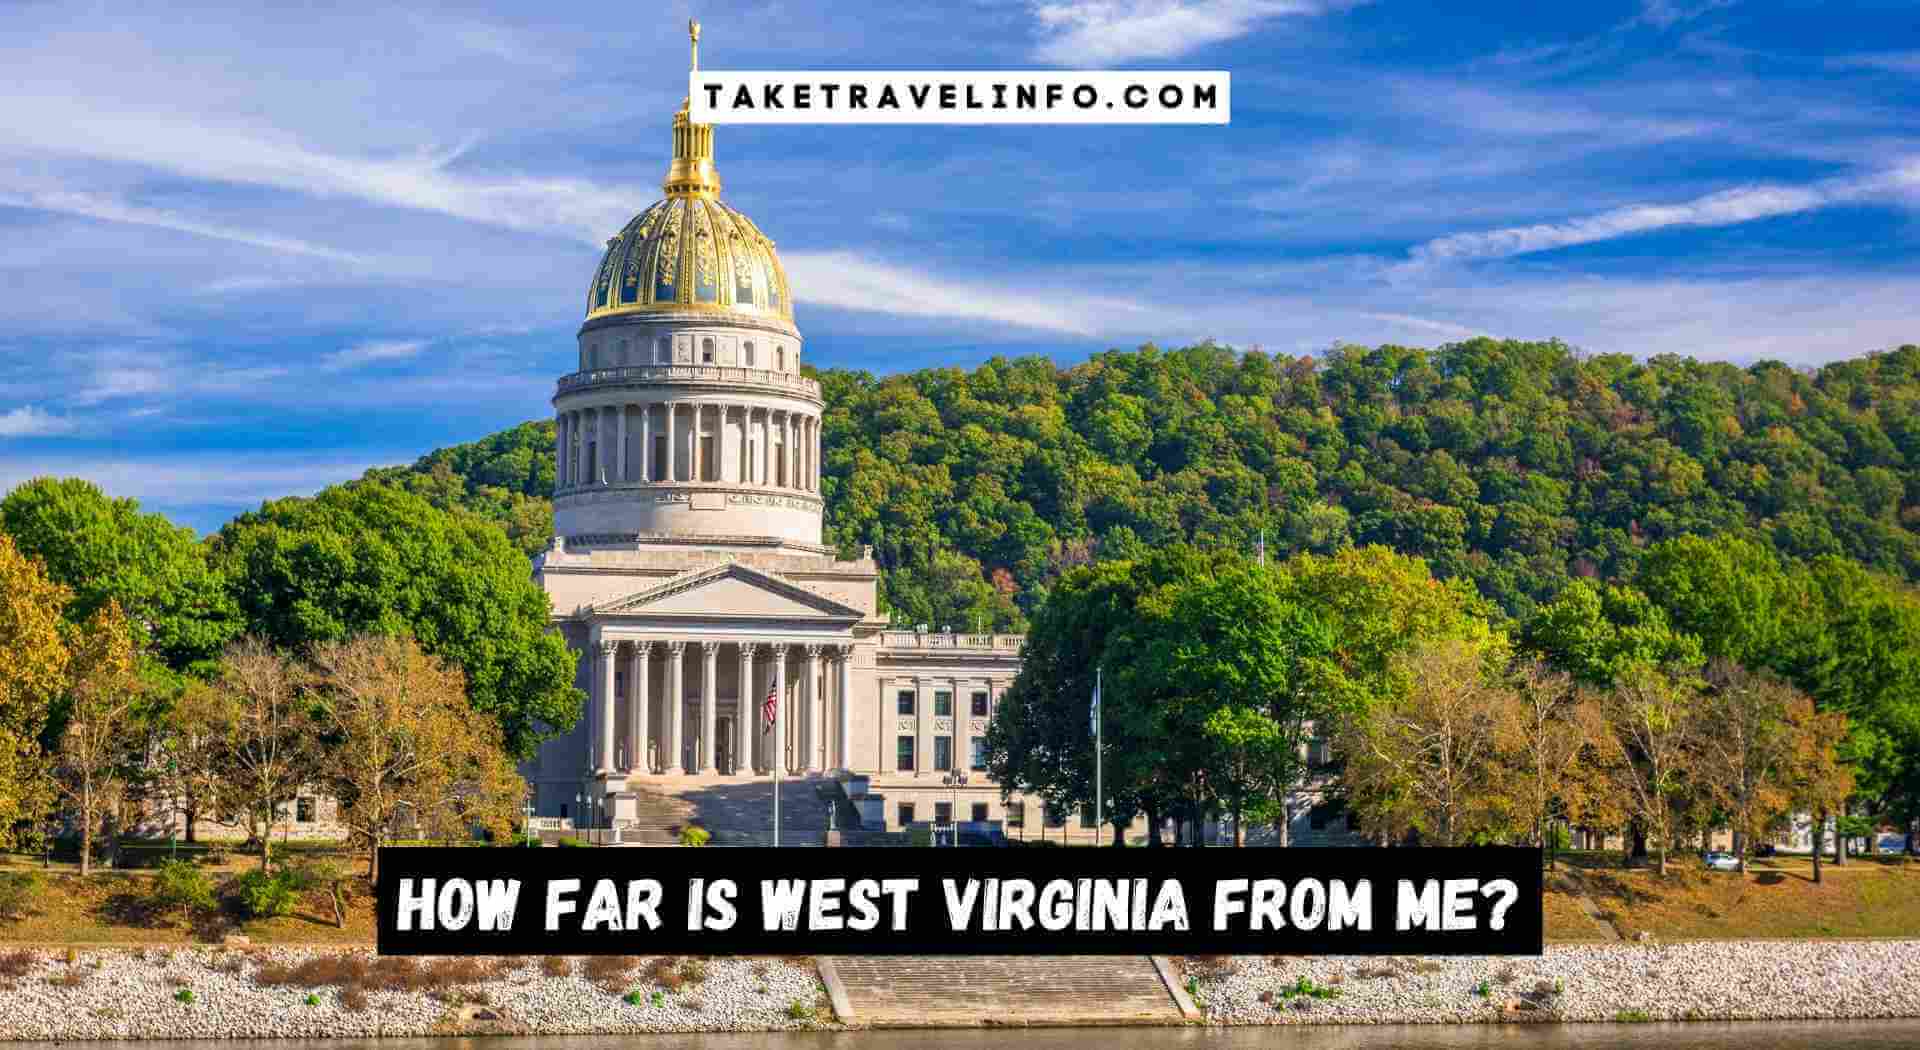 How Far is West Virginia from Me?